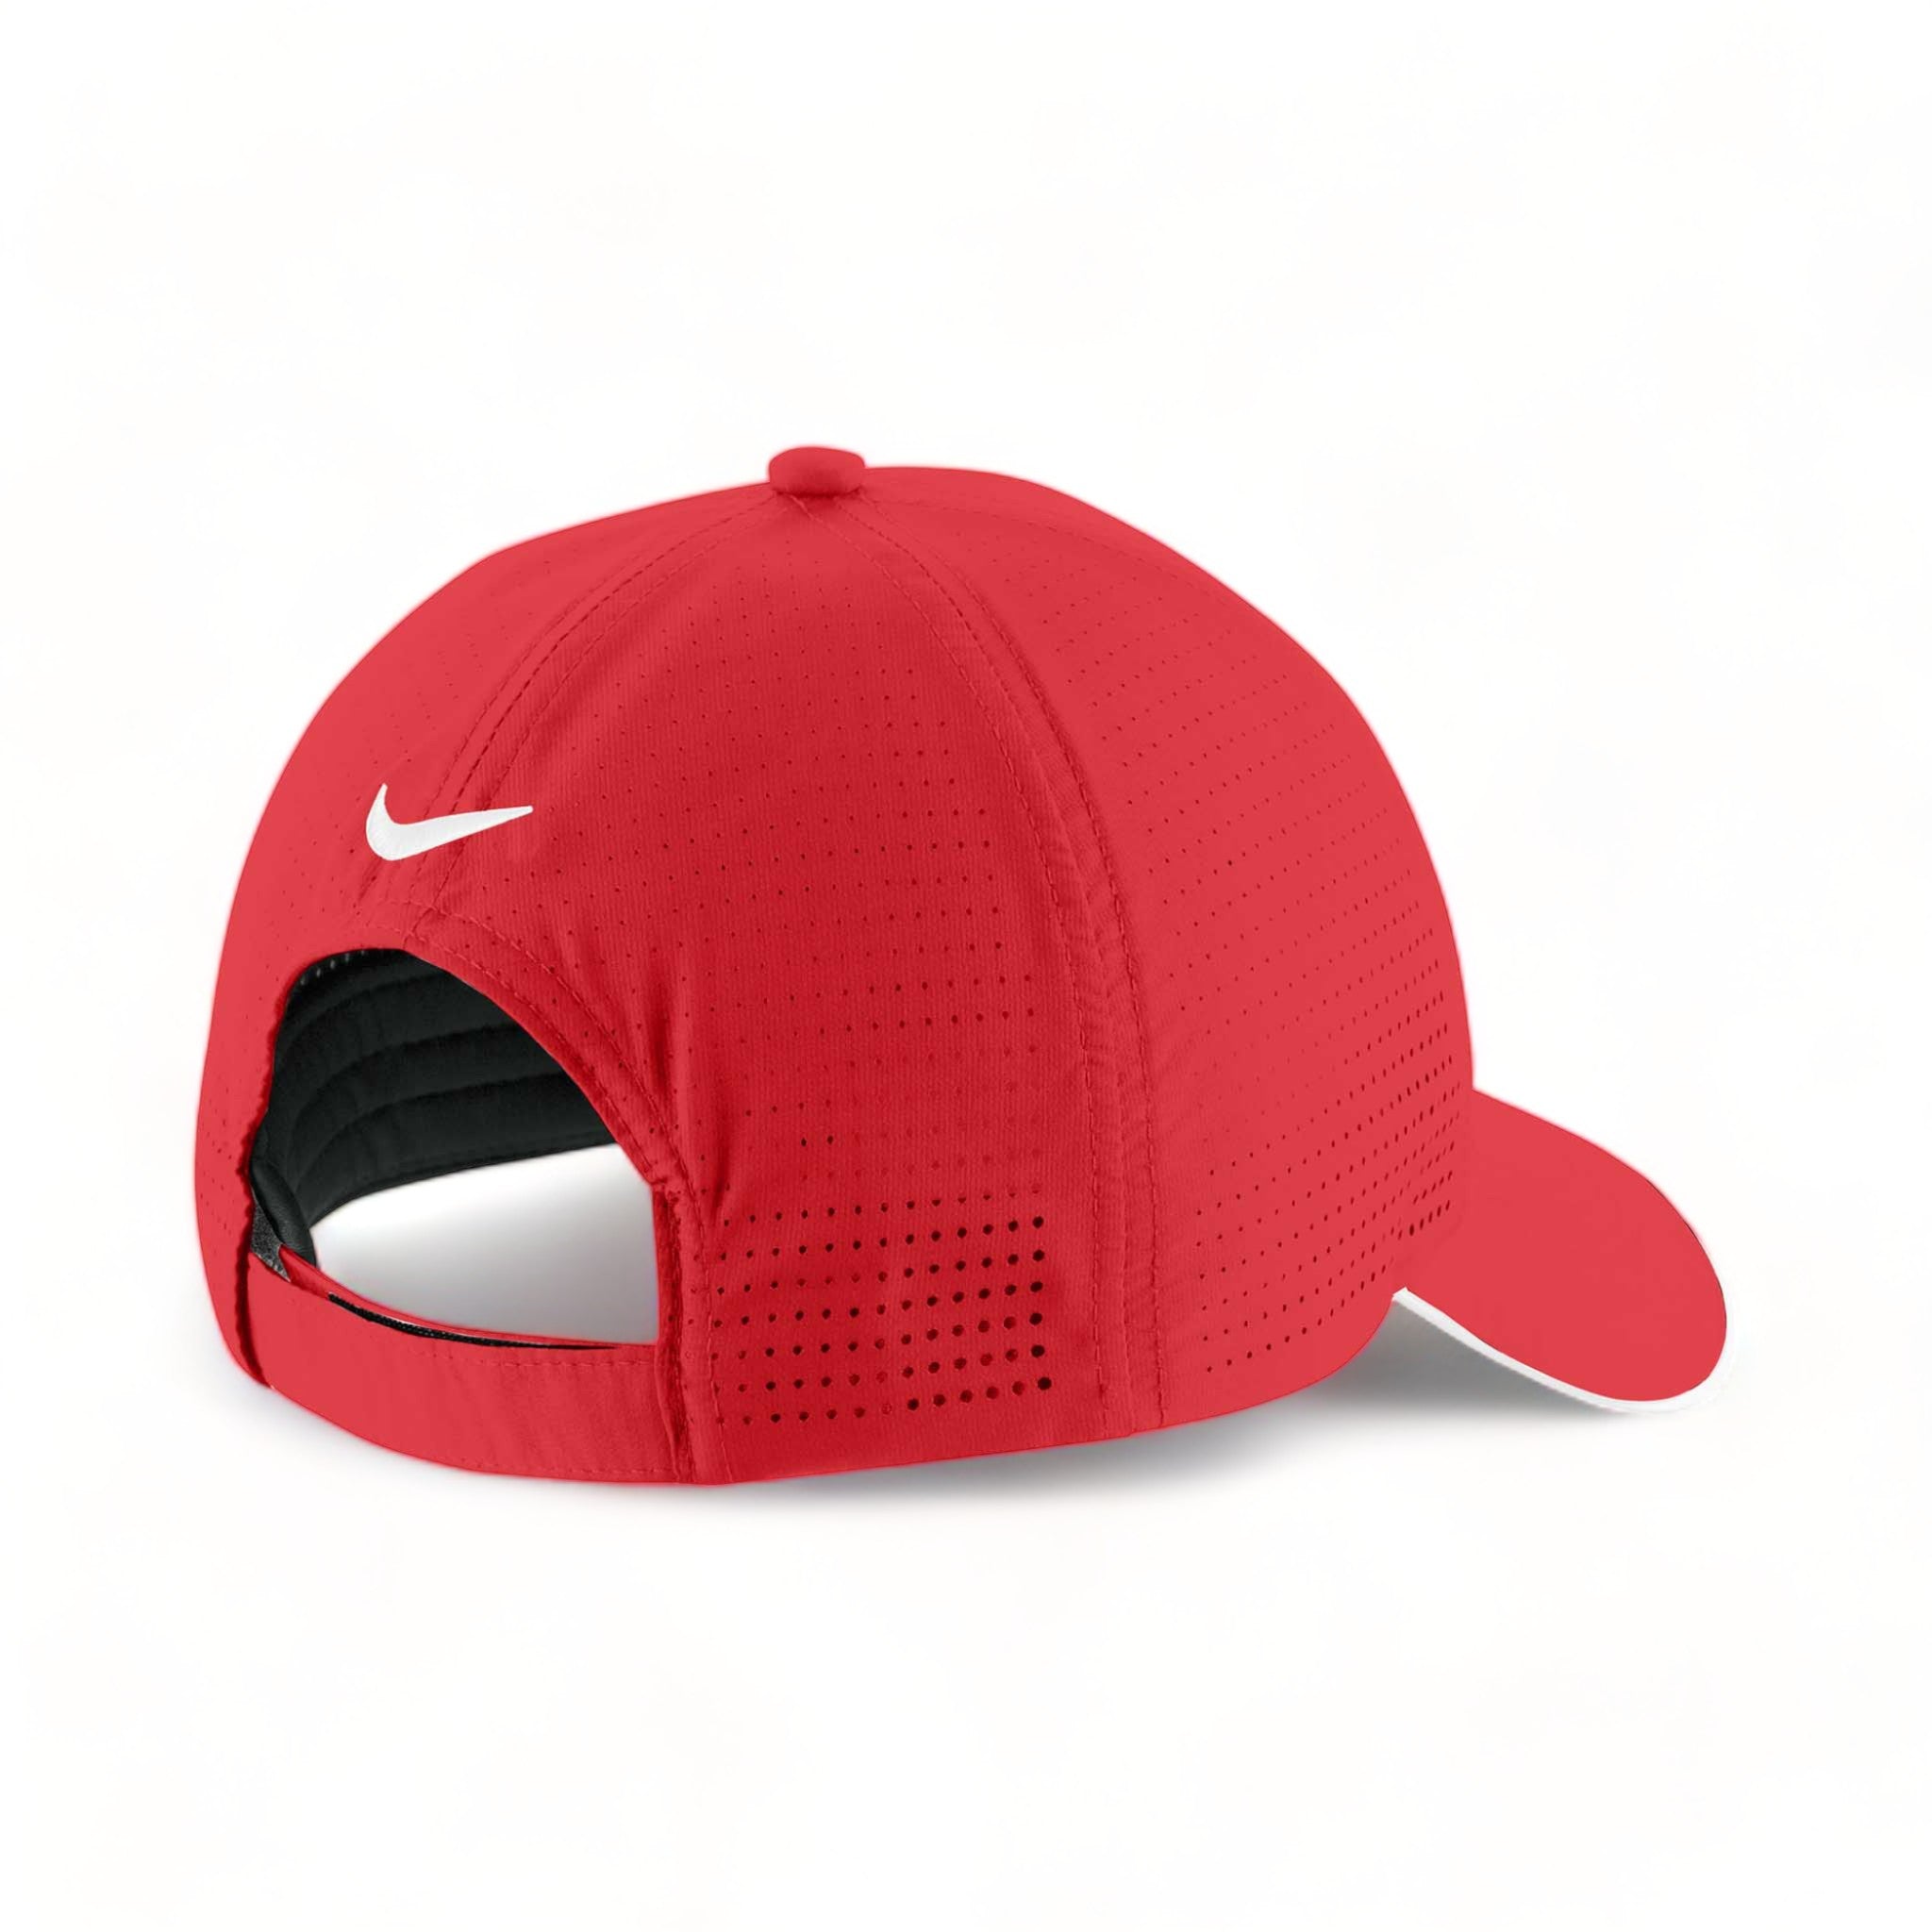 Back view of Nike NKFB6445 custom hat in university red and white